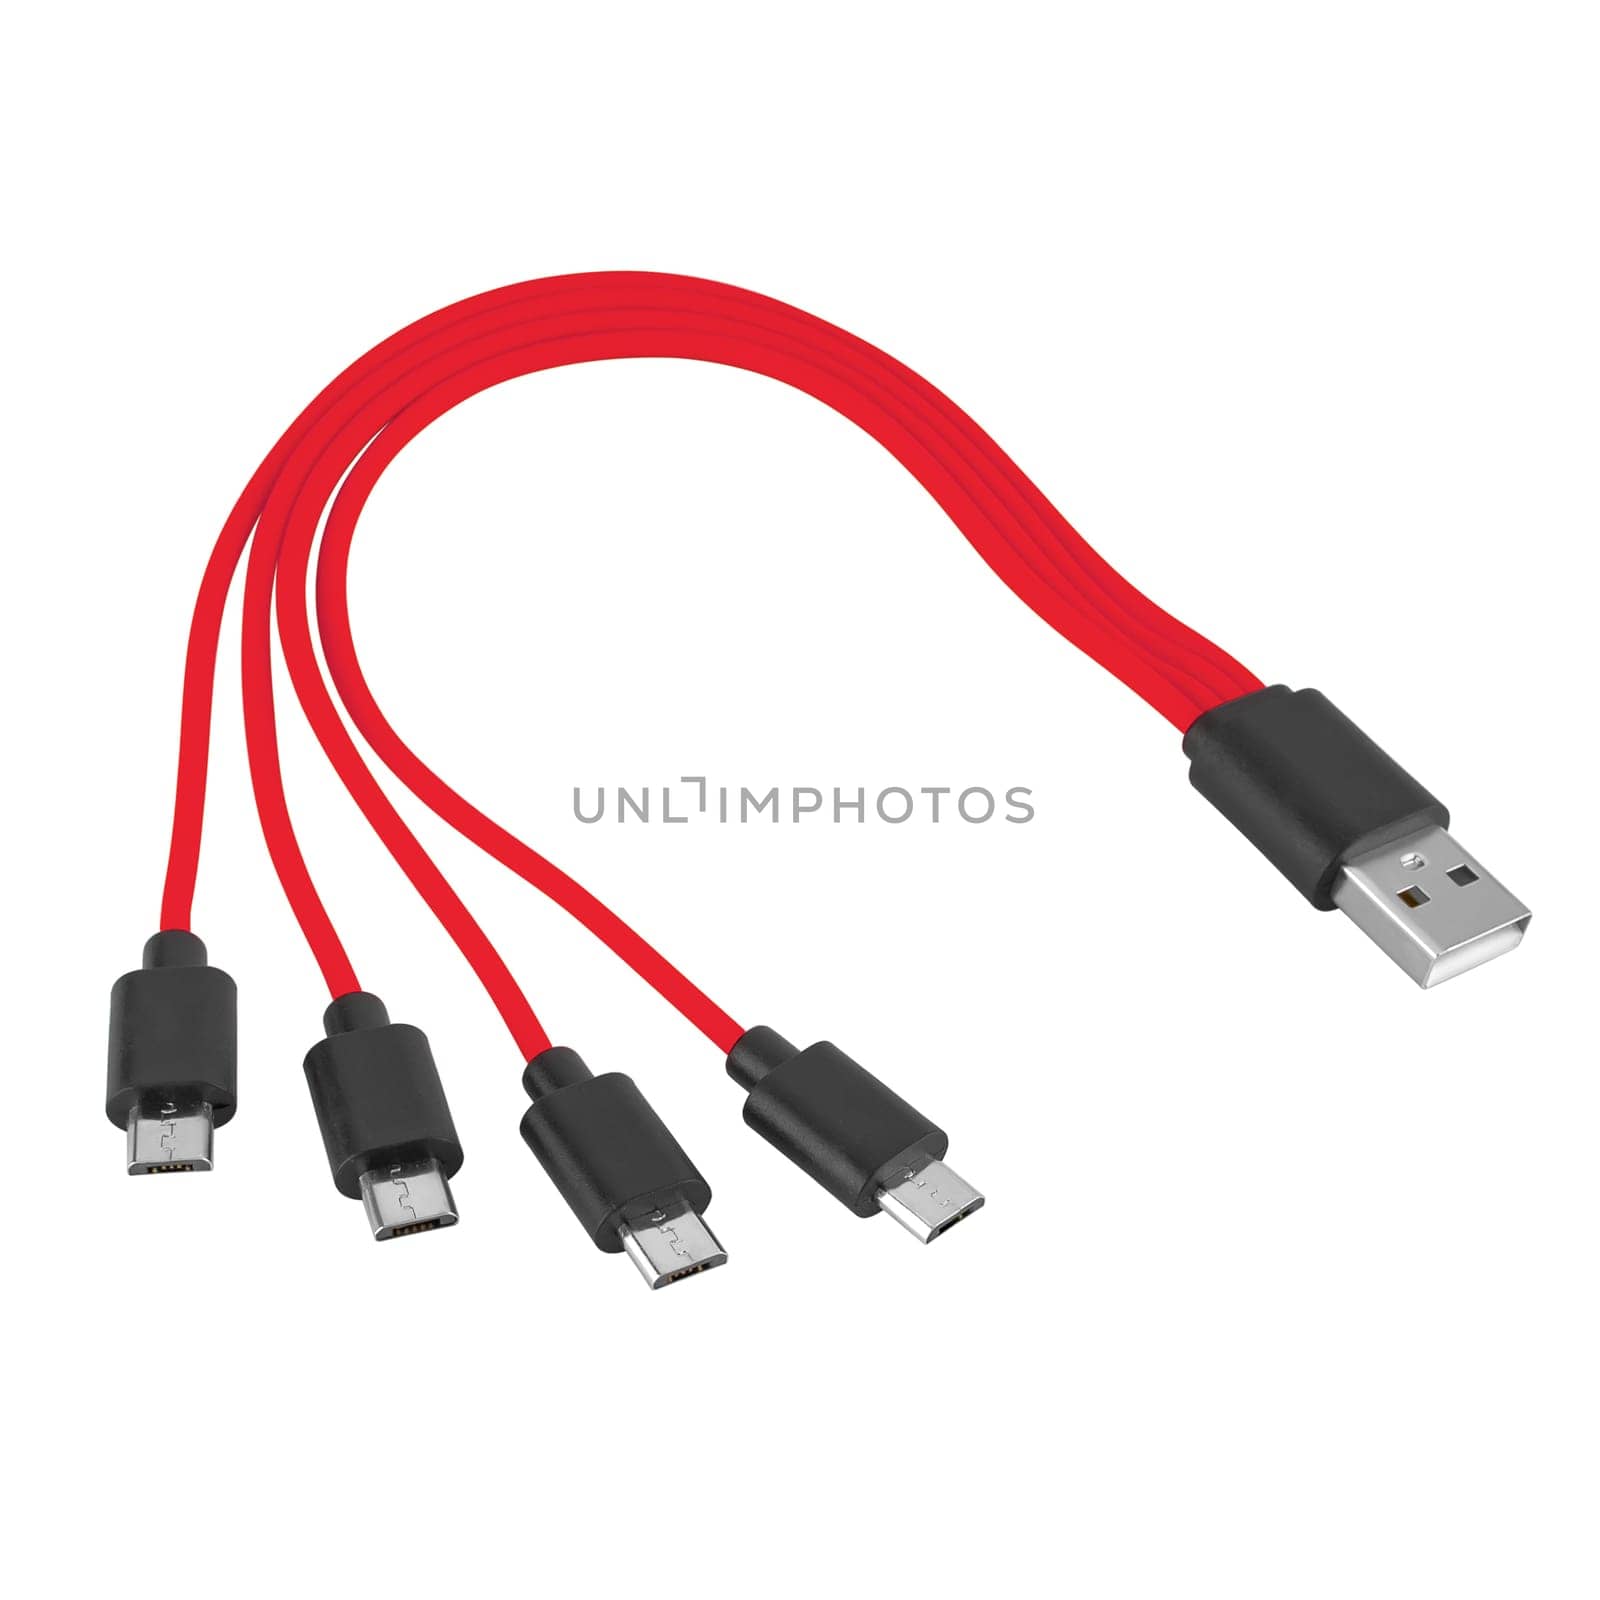 Cable with USB and micro USB connector, on white background in insulation by A_A